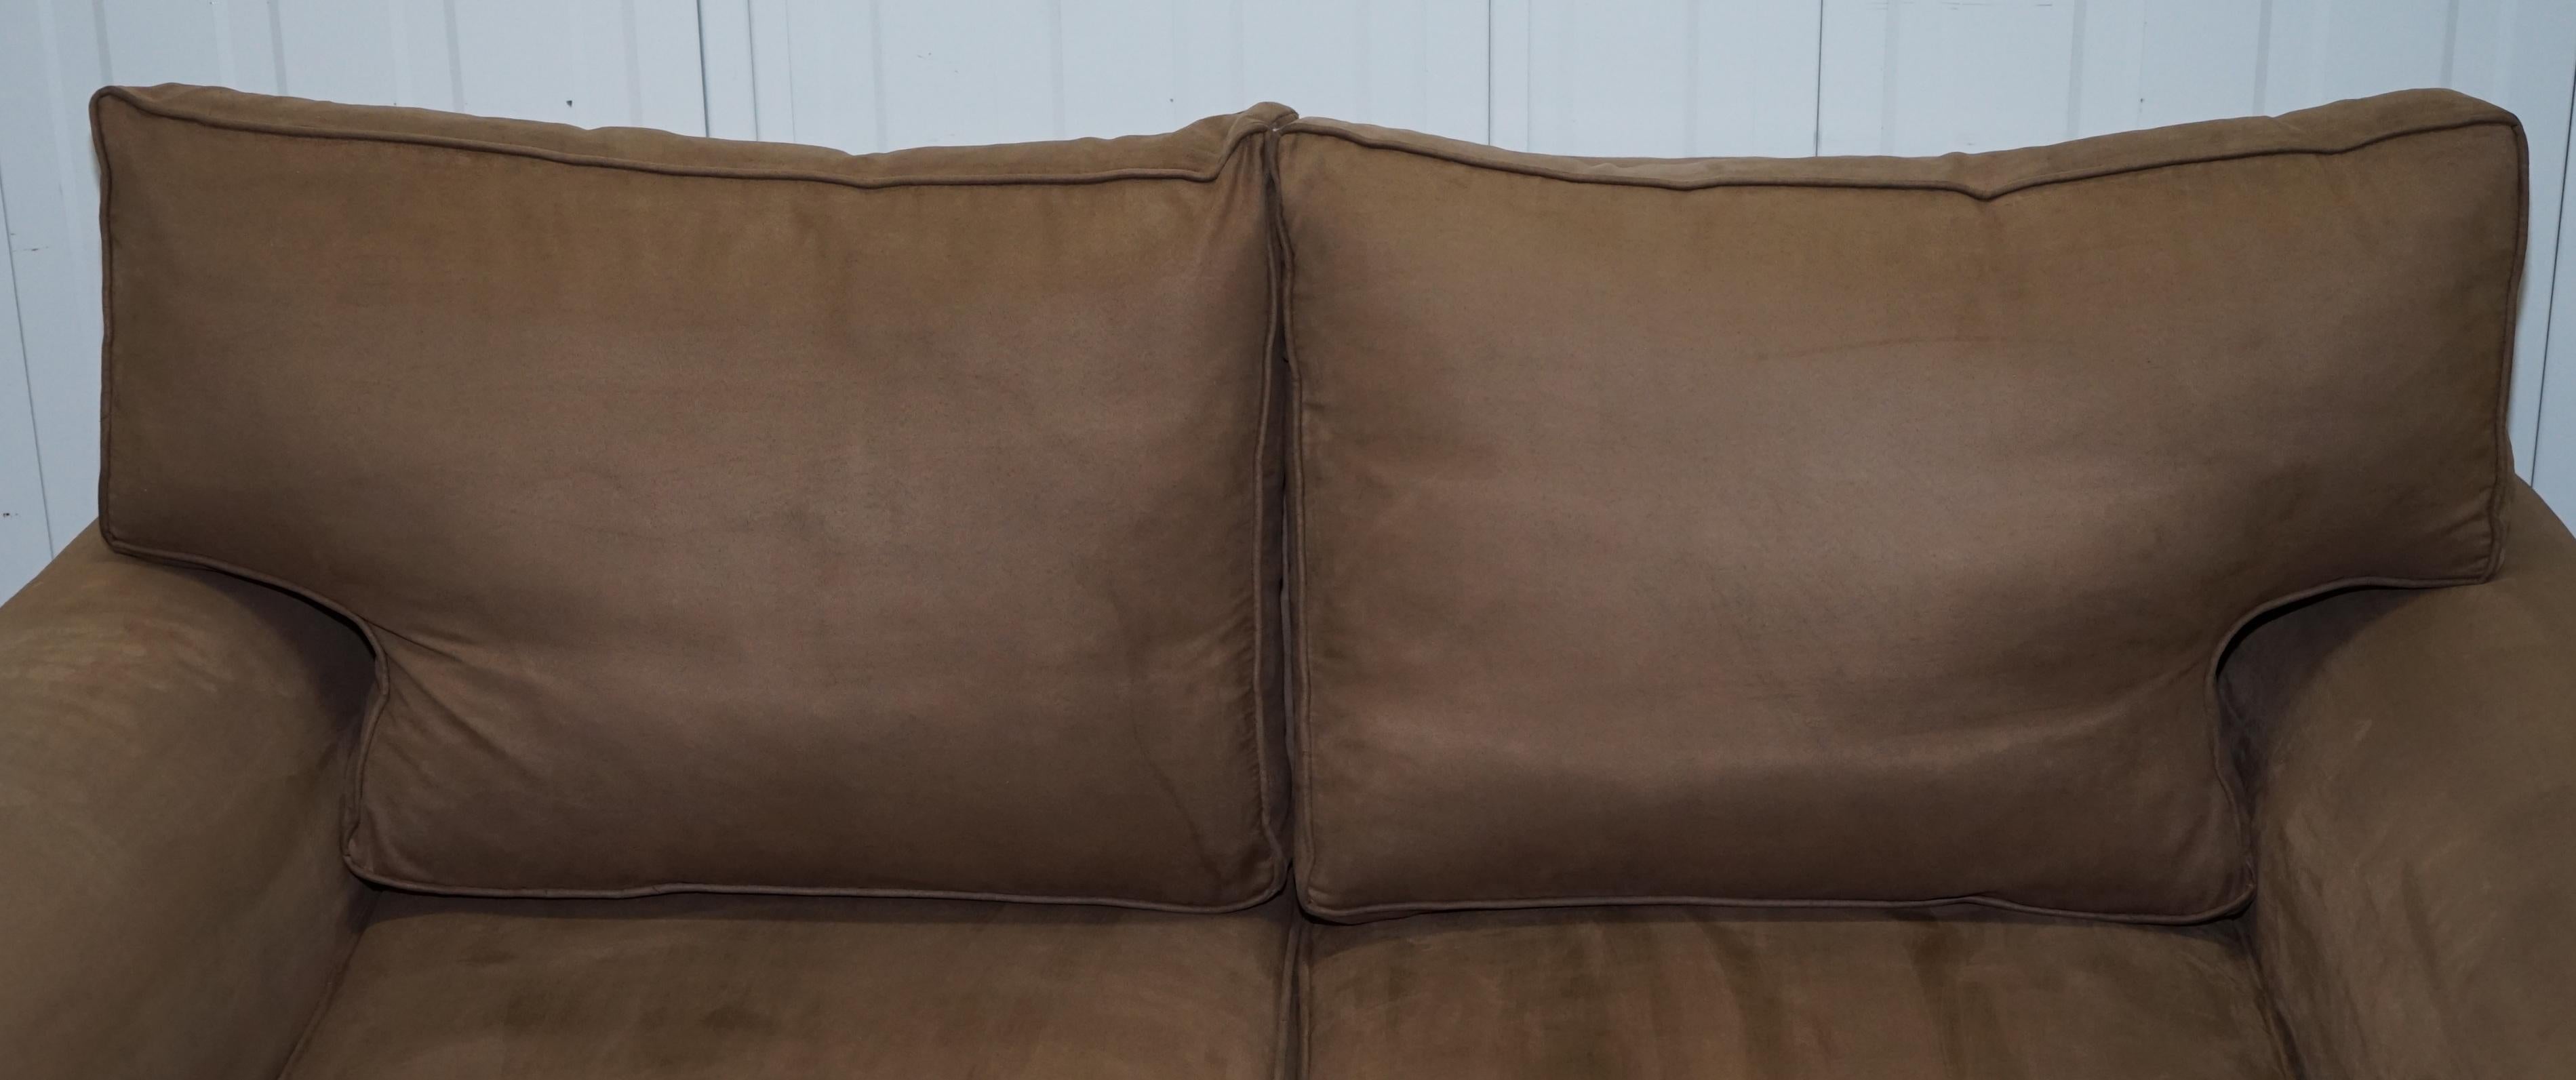 English Pair of Ralph Lauren Jamaica Salon Sofas Feather Filled Cushions For Sale